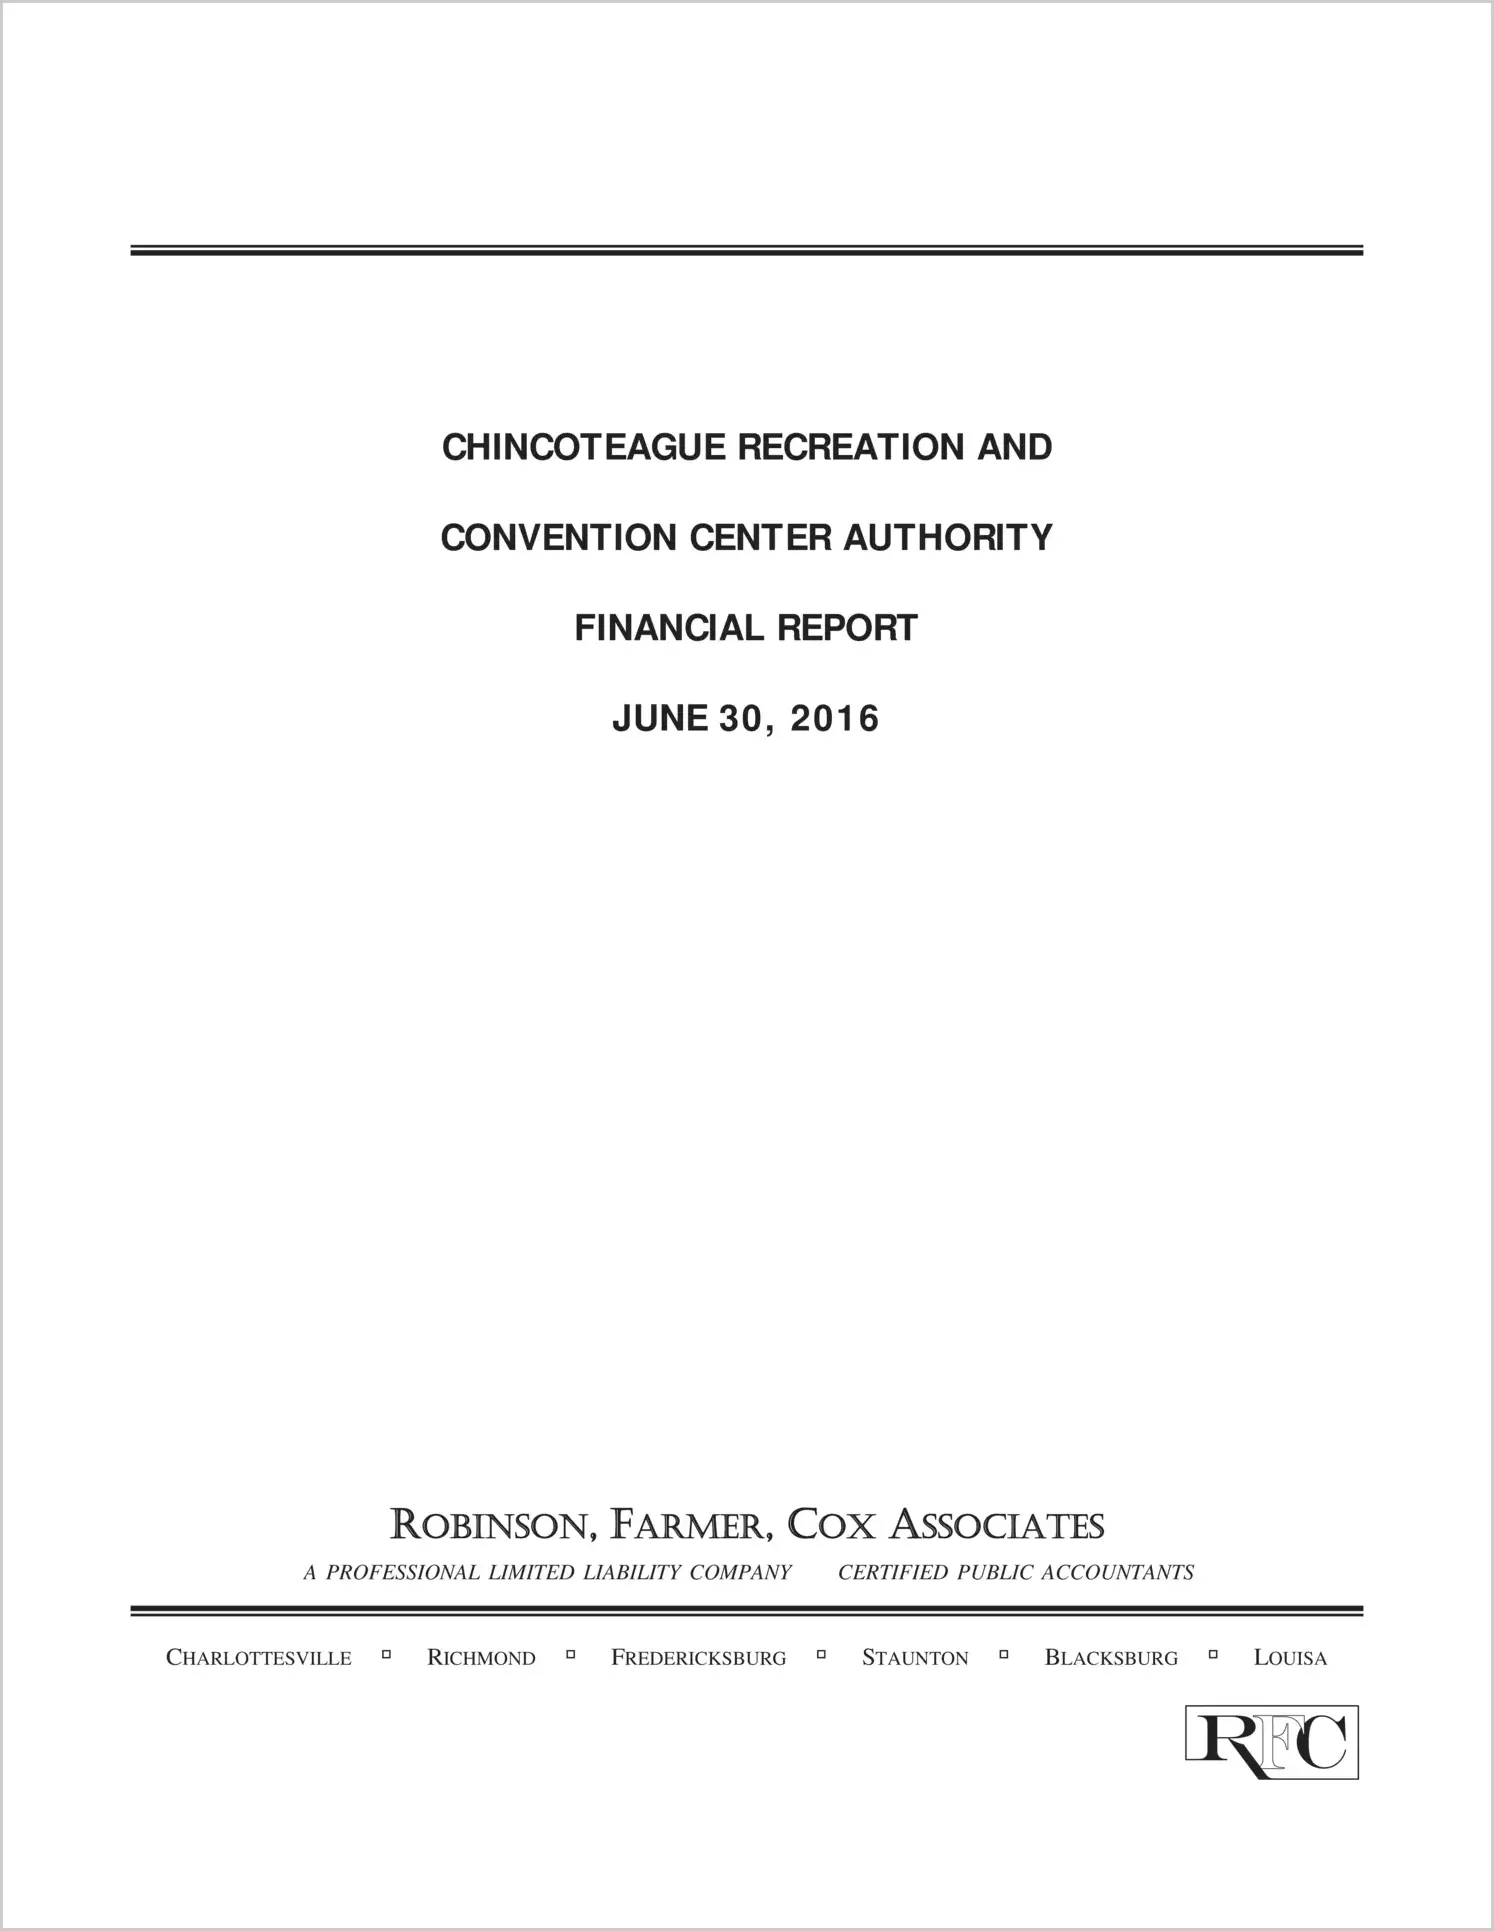 2016 ABC/Other Annual Financial Report  for Chincoteague Rec-Convention Center Authority